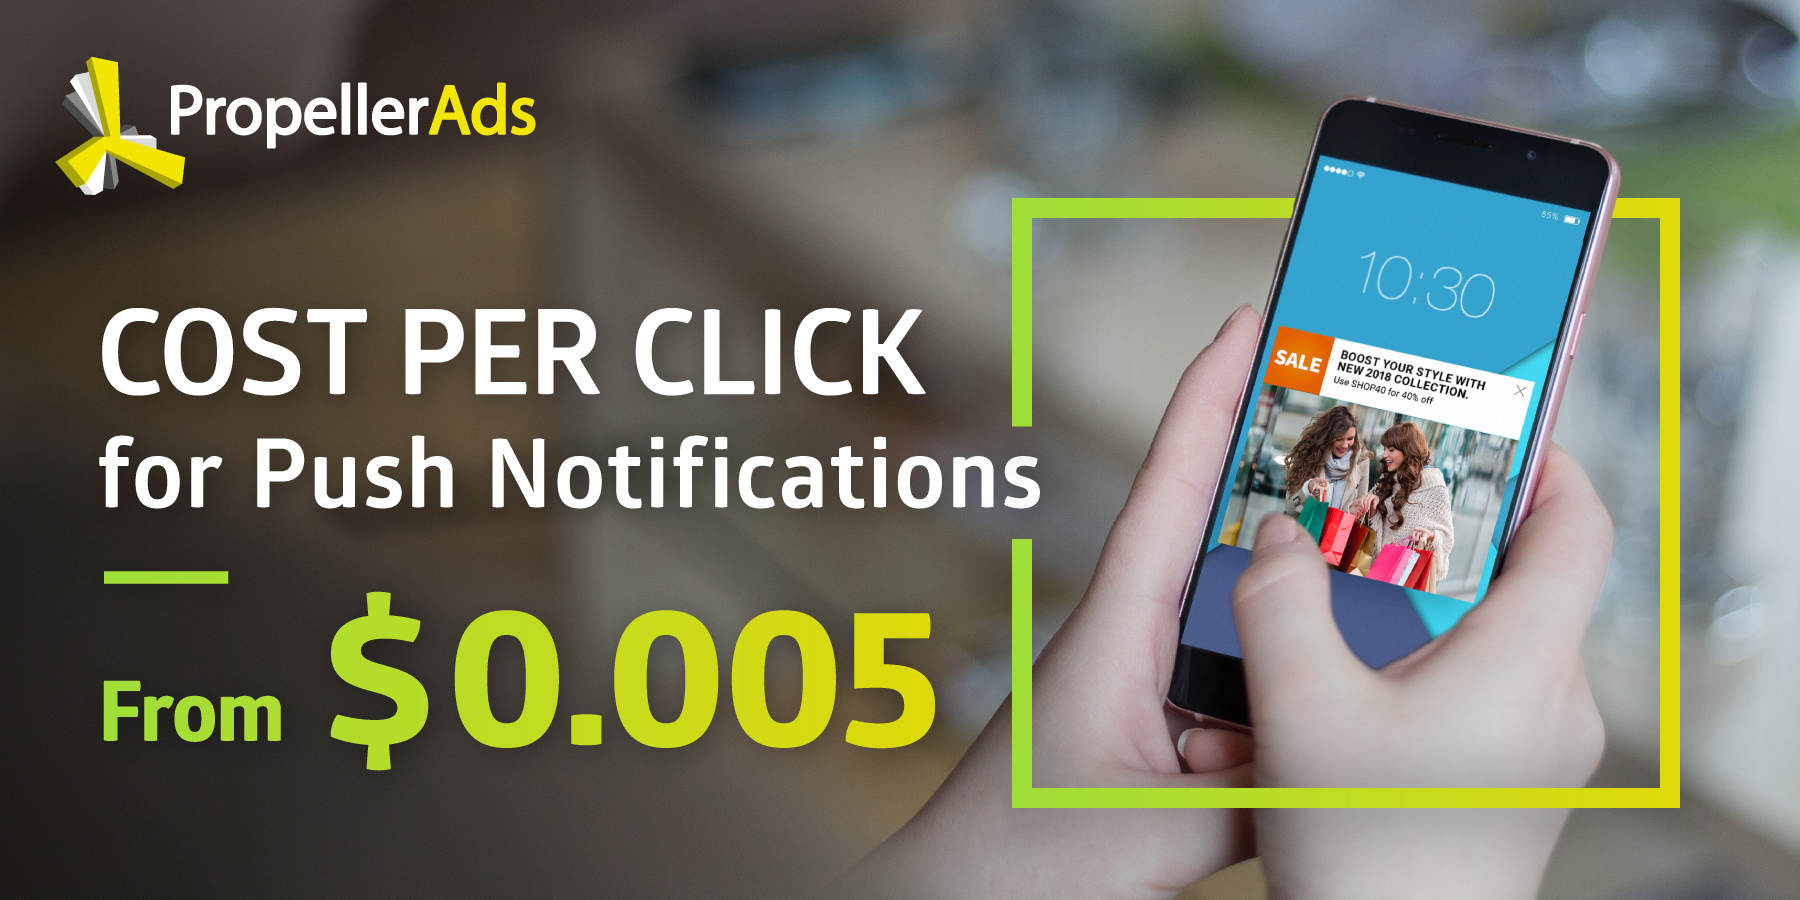 ew Bidding Model! Cost per Click is Now Available for Native Push Notifications